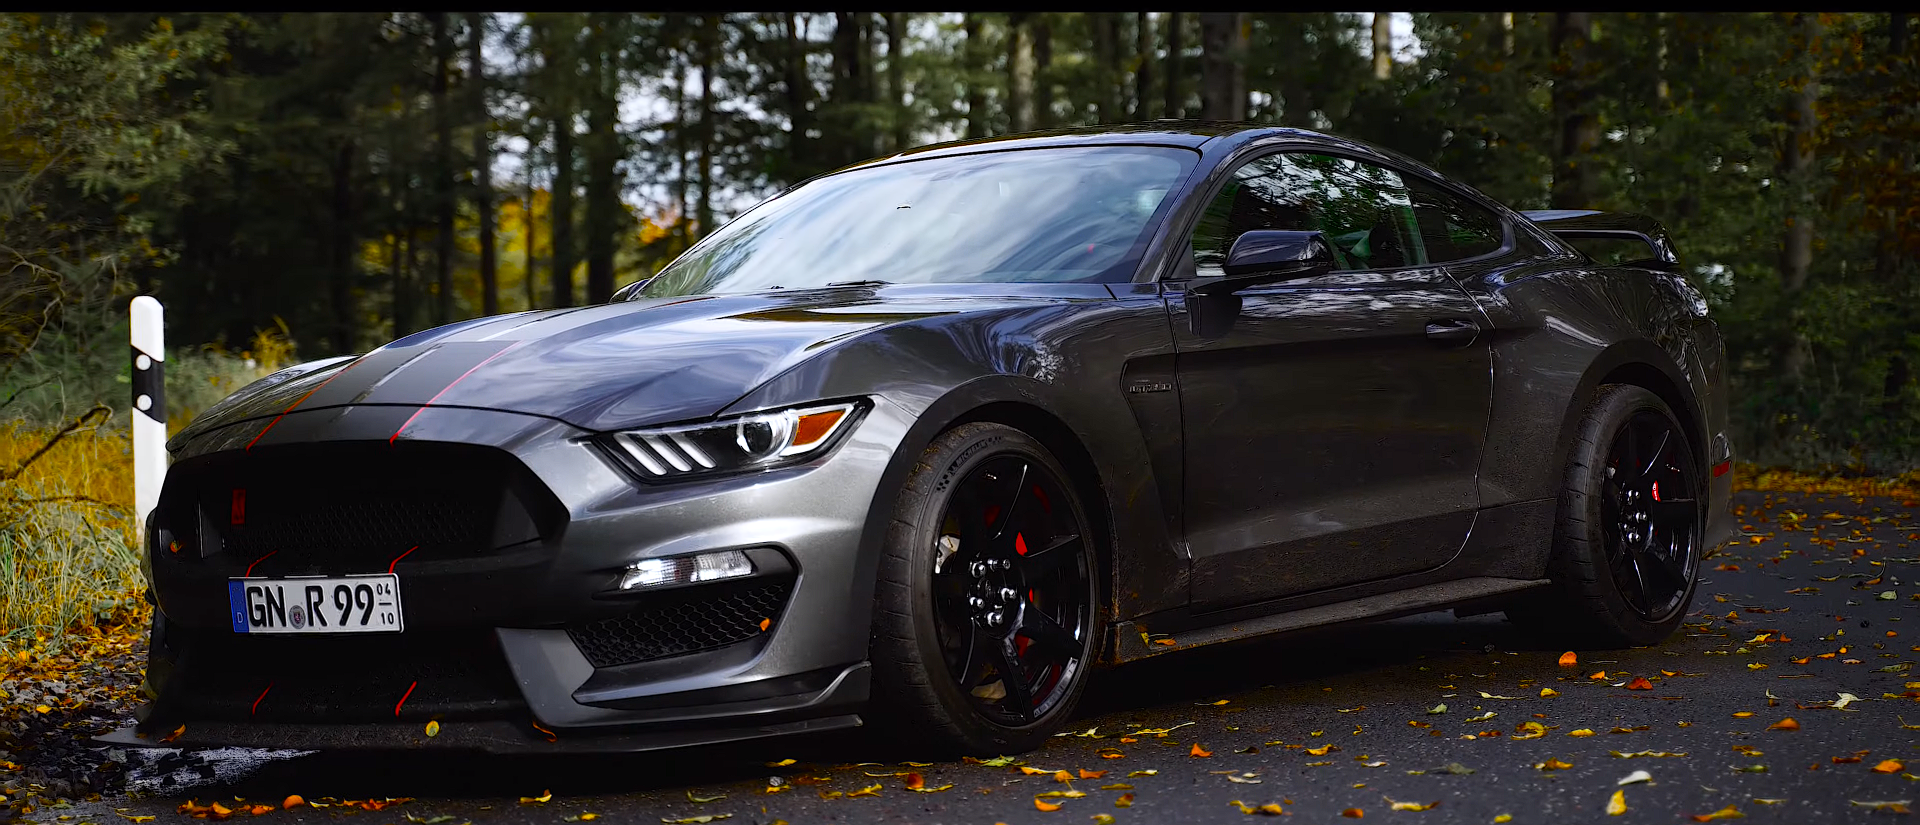 This 2018 Ford Mustang Shelby GT350R Is Very Gorgoues